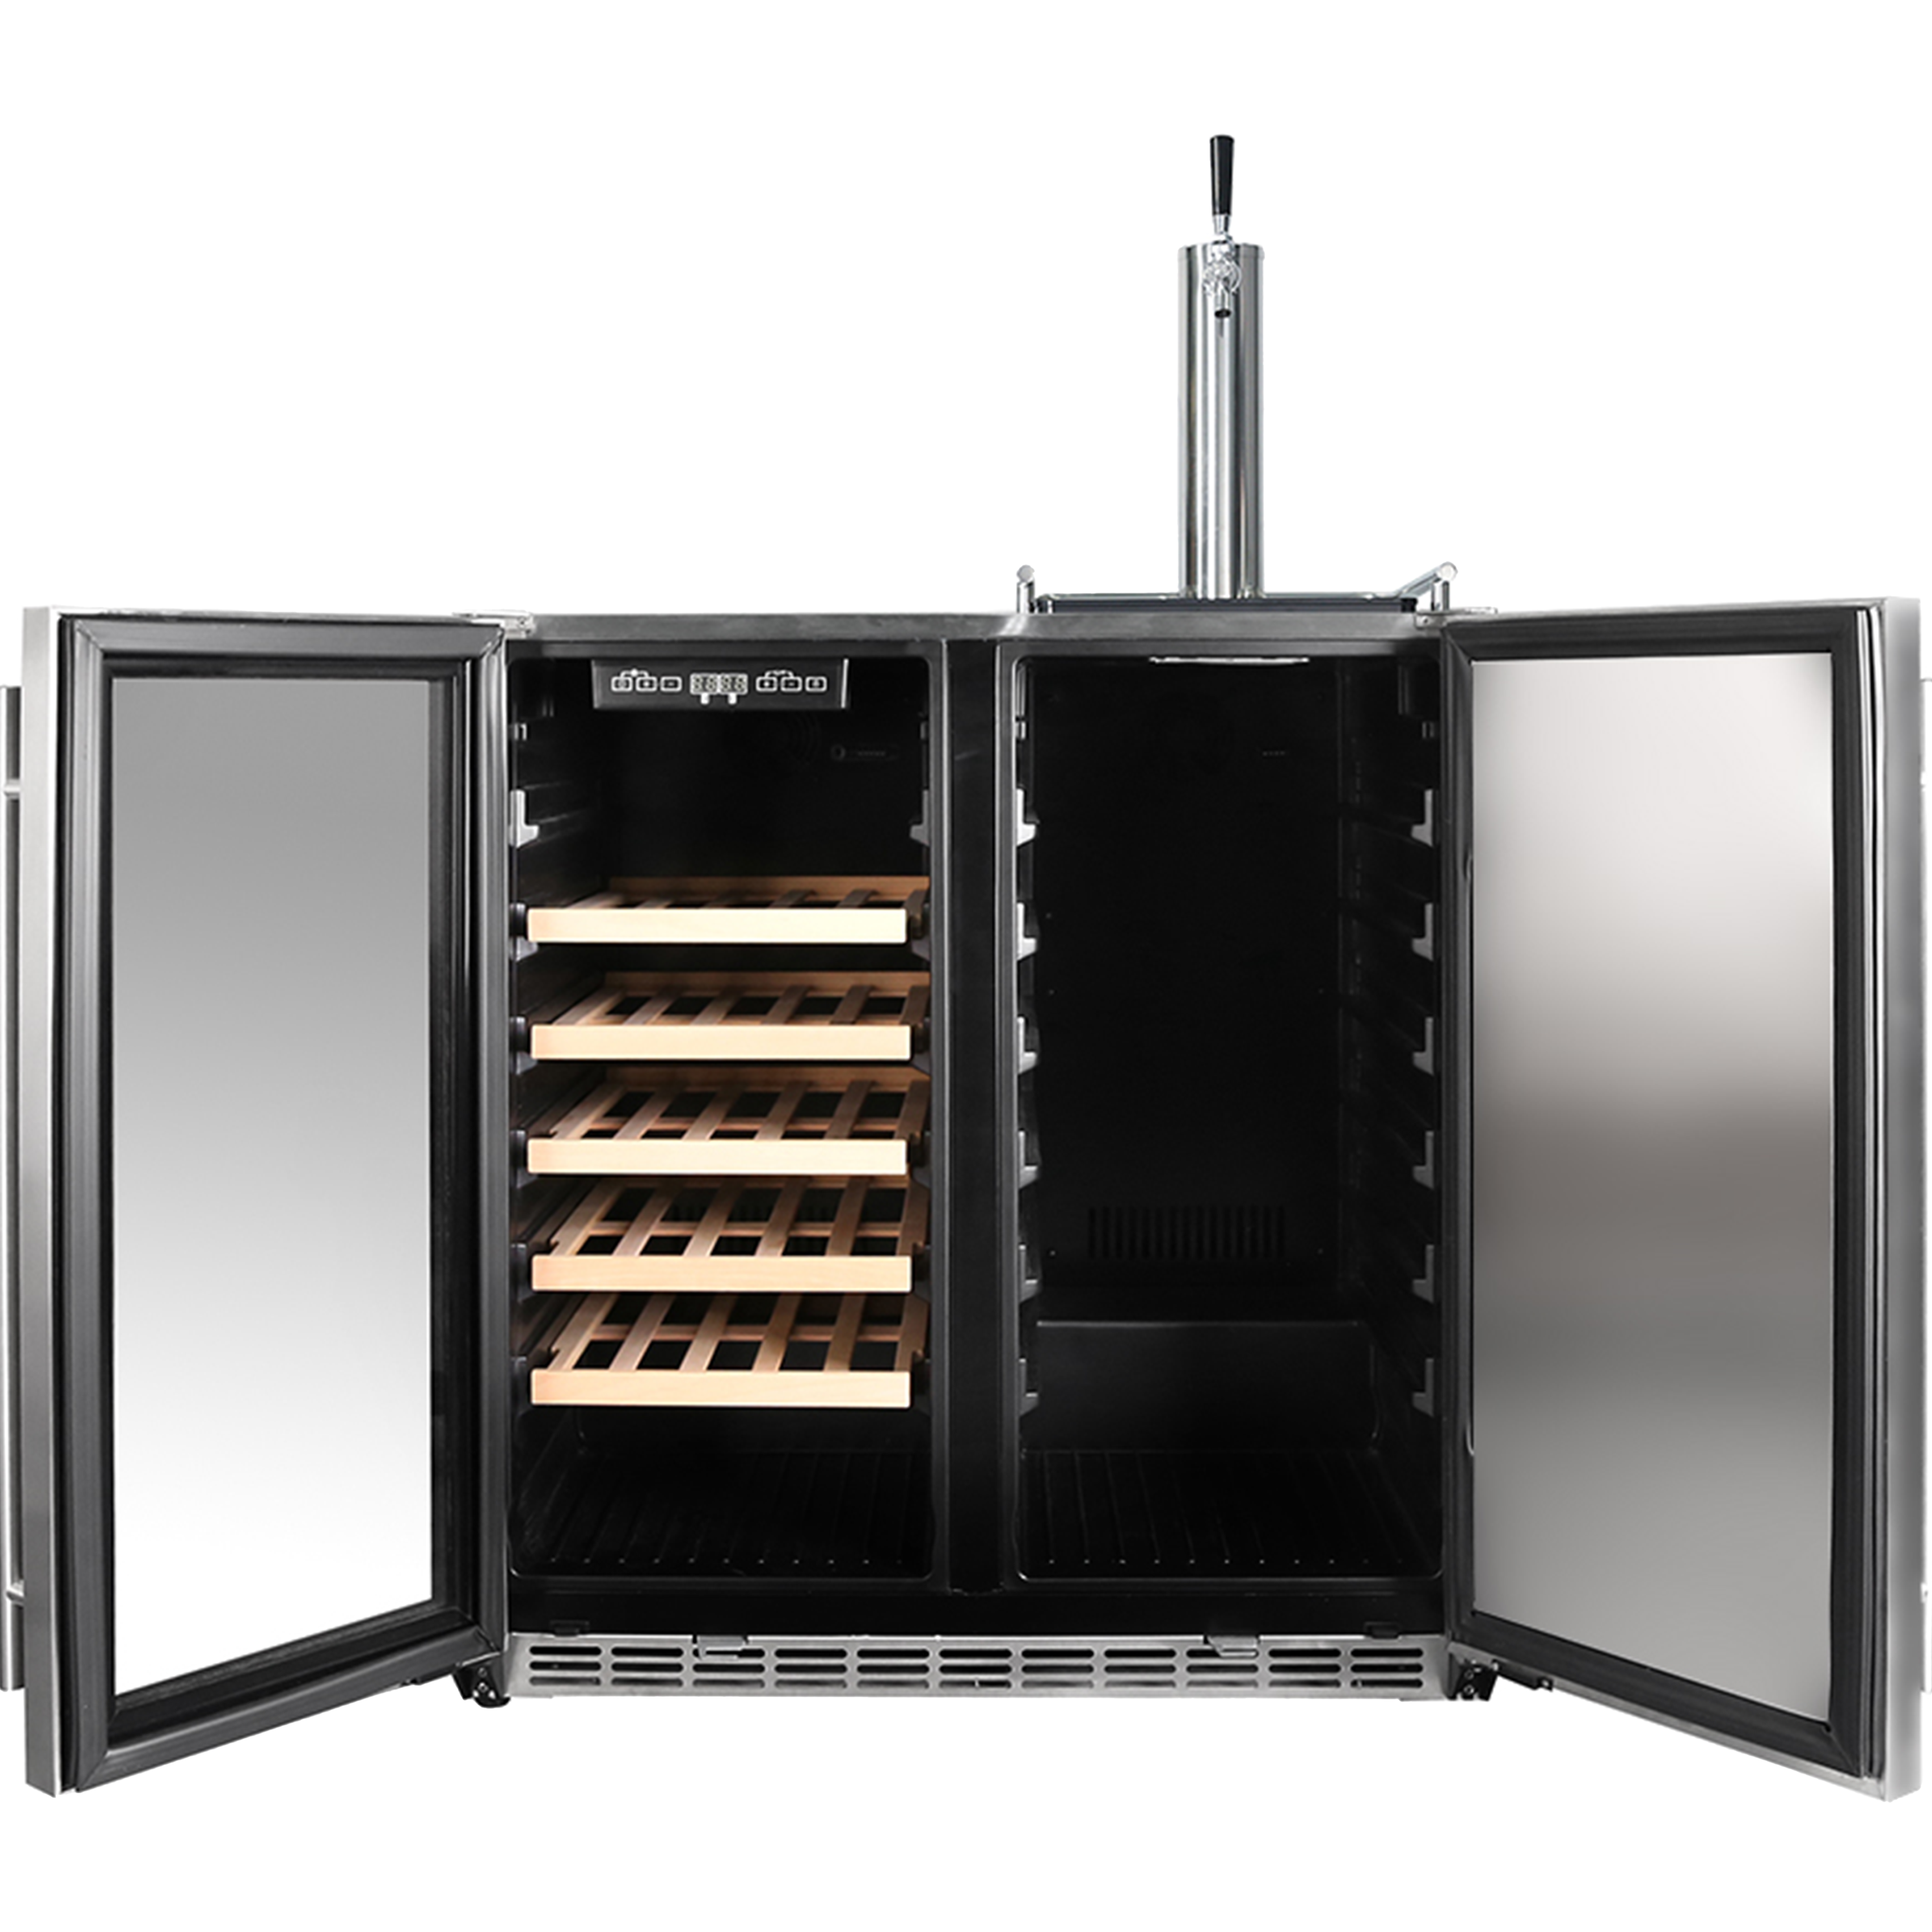 Front view of a 6.3 Cu Ft Wine Outdoor Refrigerator With Single Tap Kegerator with both doors open, revealing two compartments. The refrigerator features a digital temperature control panel. One compartment is equipped with five wooden shelves.